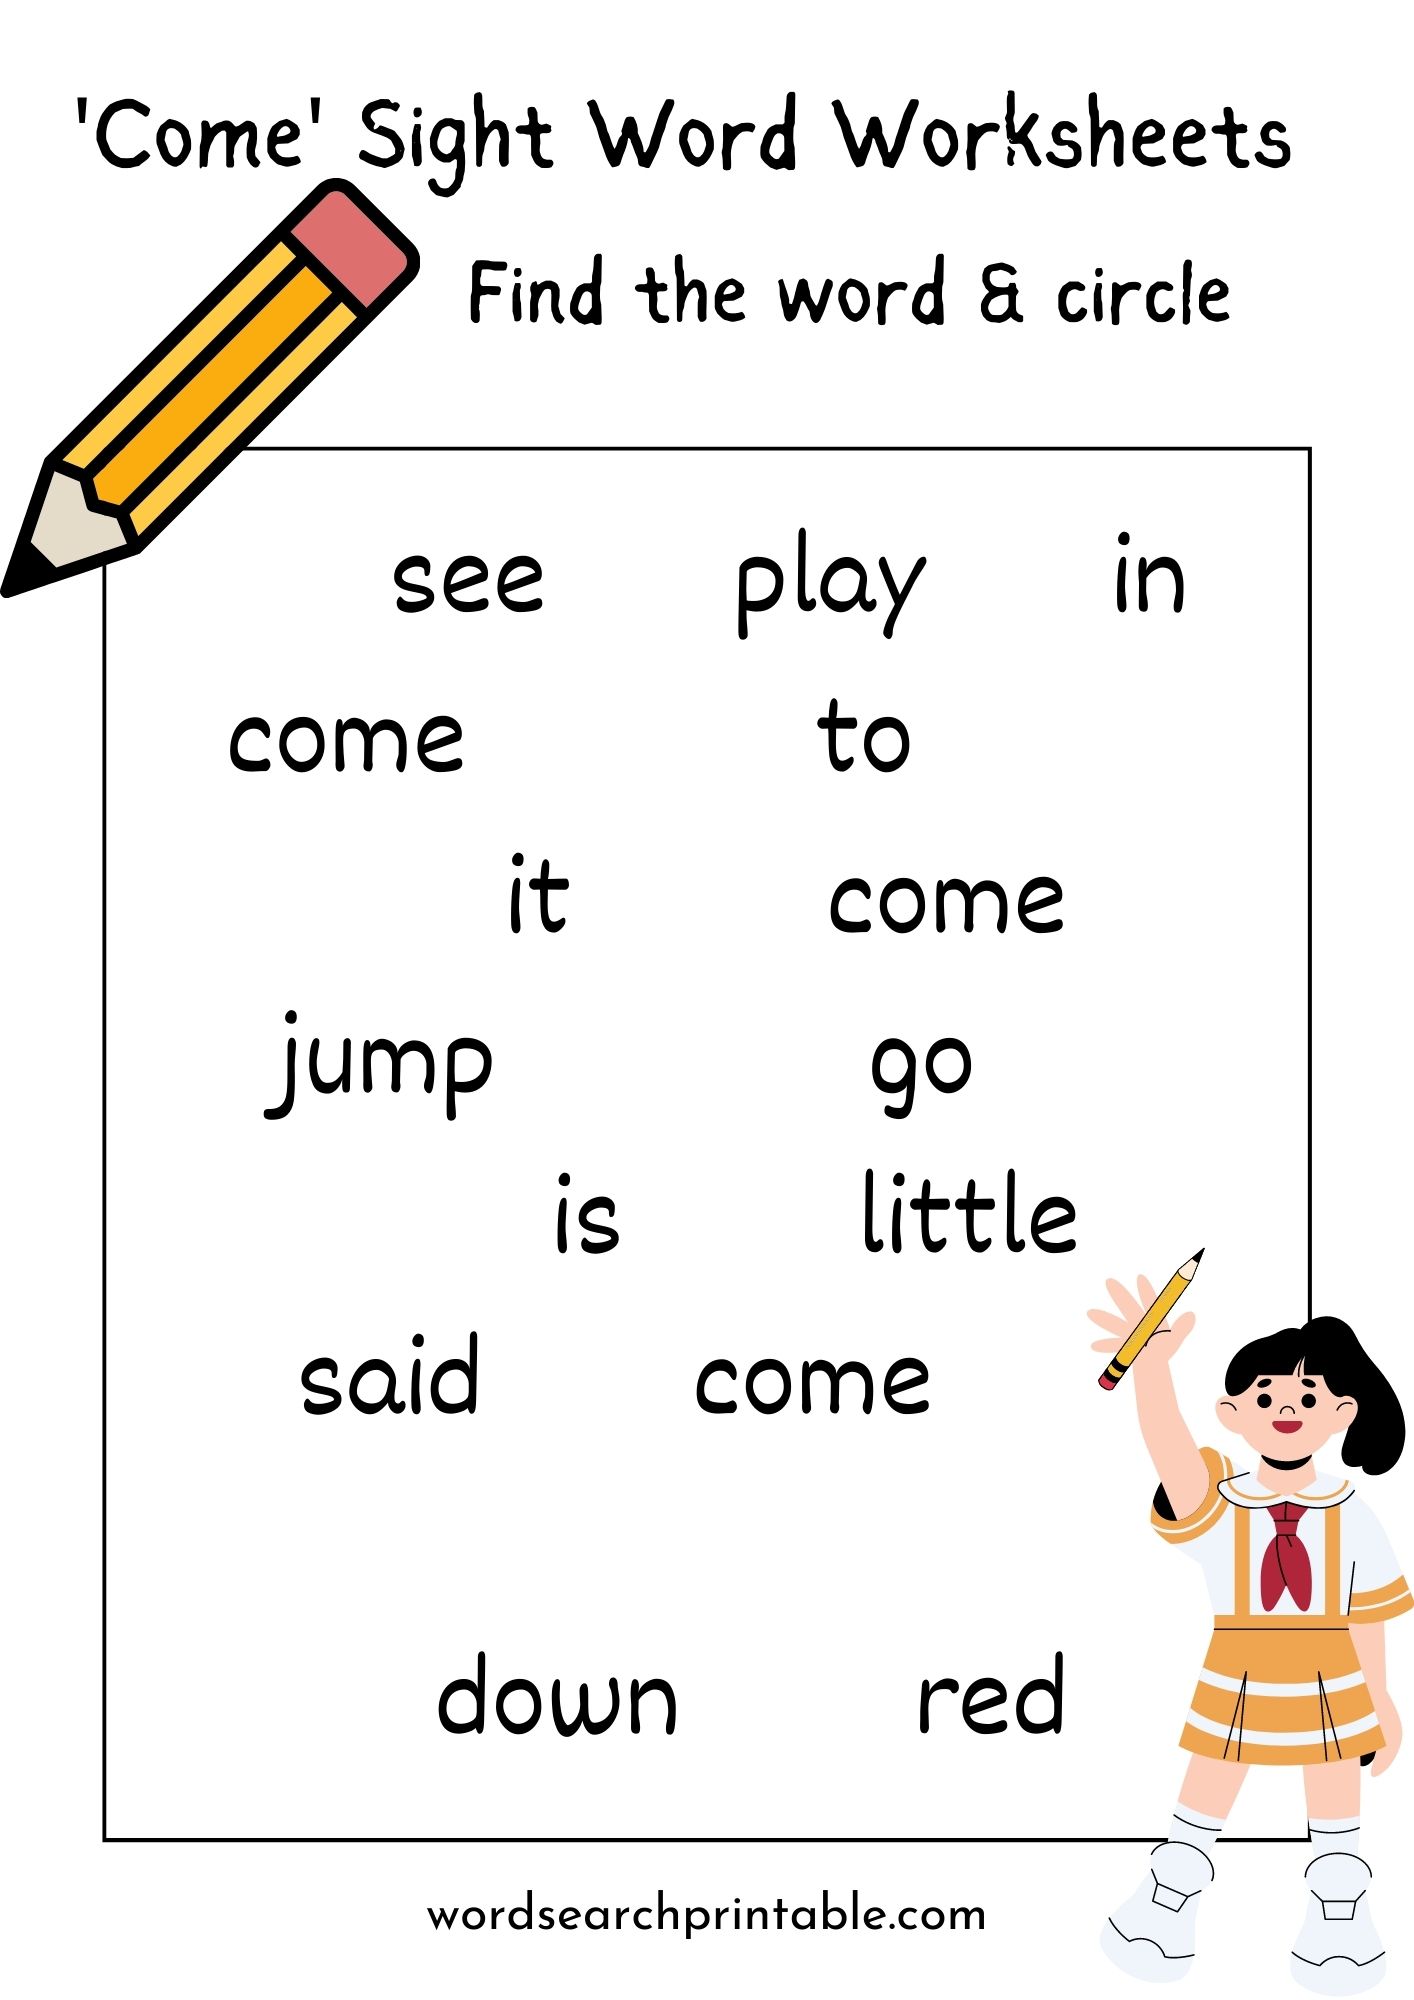 Find the sight word Come and circle it